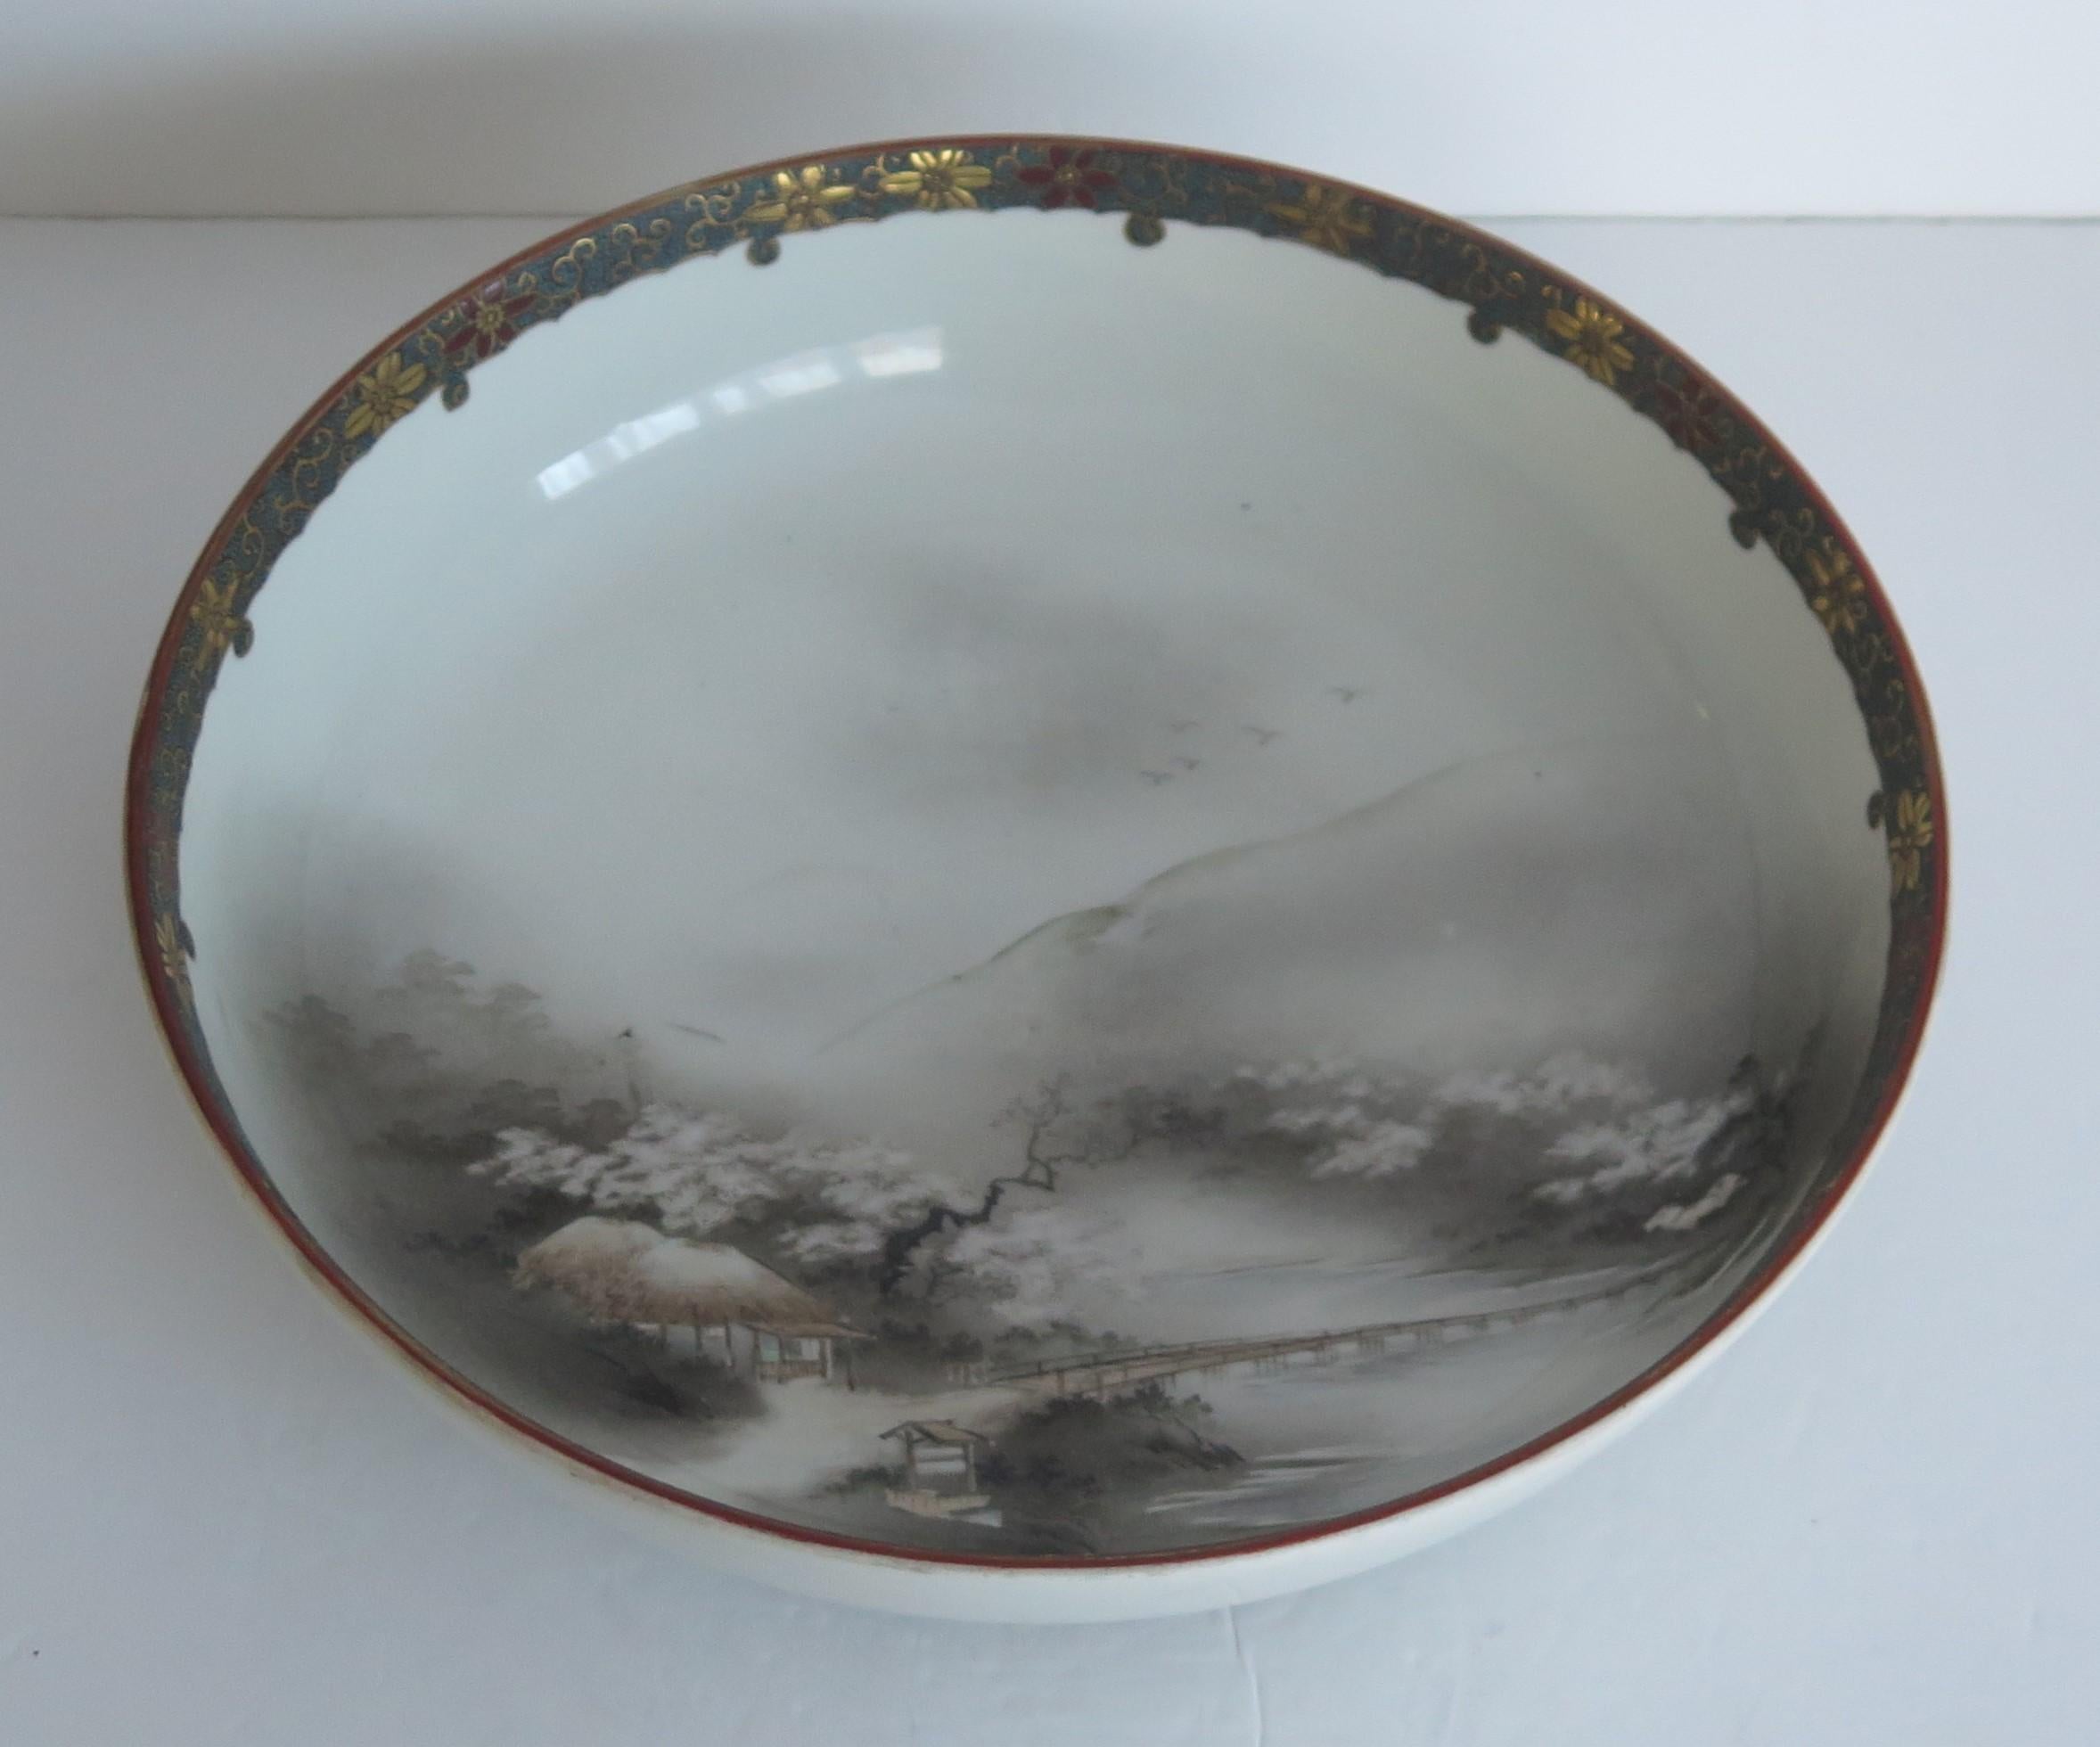 This is a high quality Earthenware Japanese Satsuma - Kutani large Bowl, beautifully hand decorated and dating to Circa 1940.

This is a well potted large diameter bowl, sitting on a low foot. 

The bowl is beautifully hand-painted inside with a